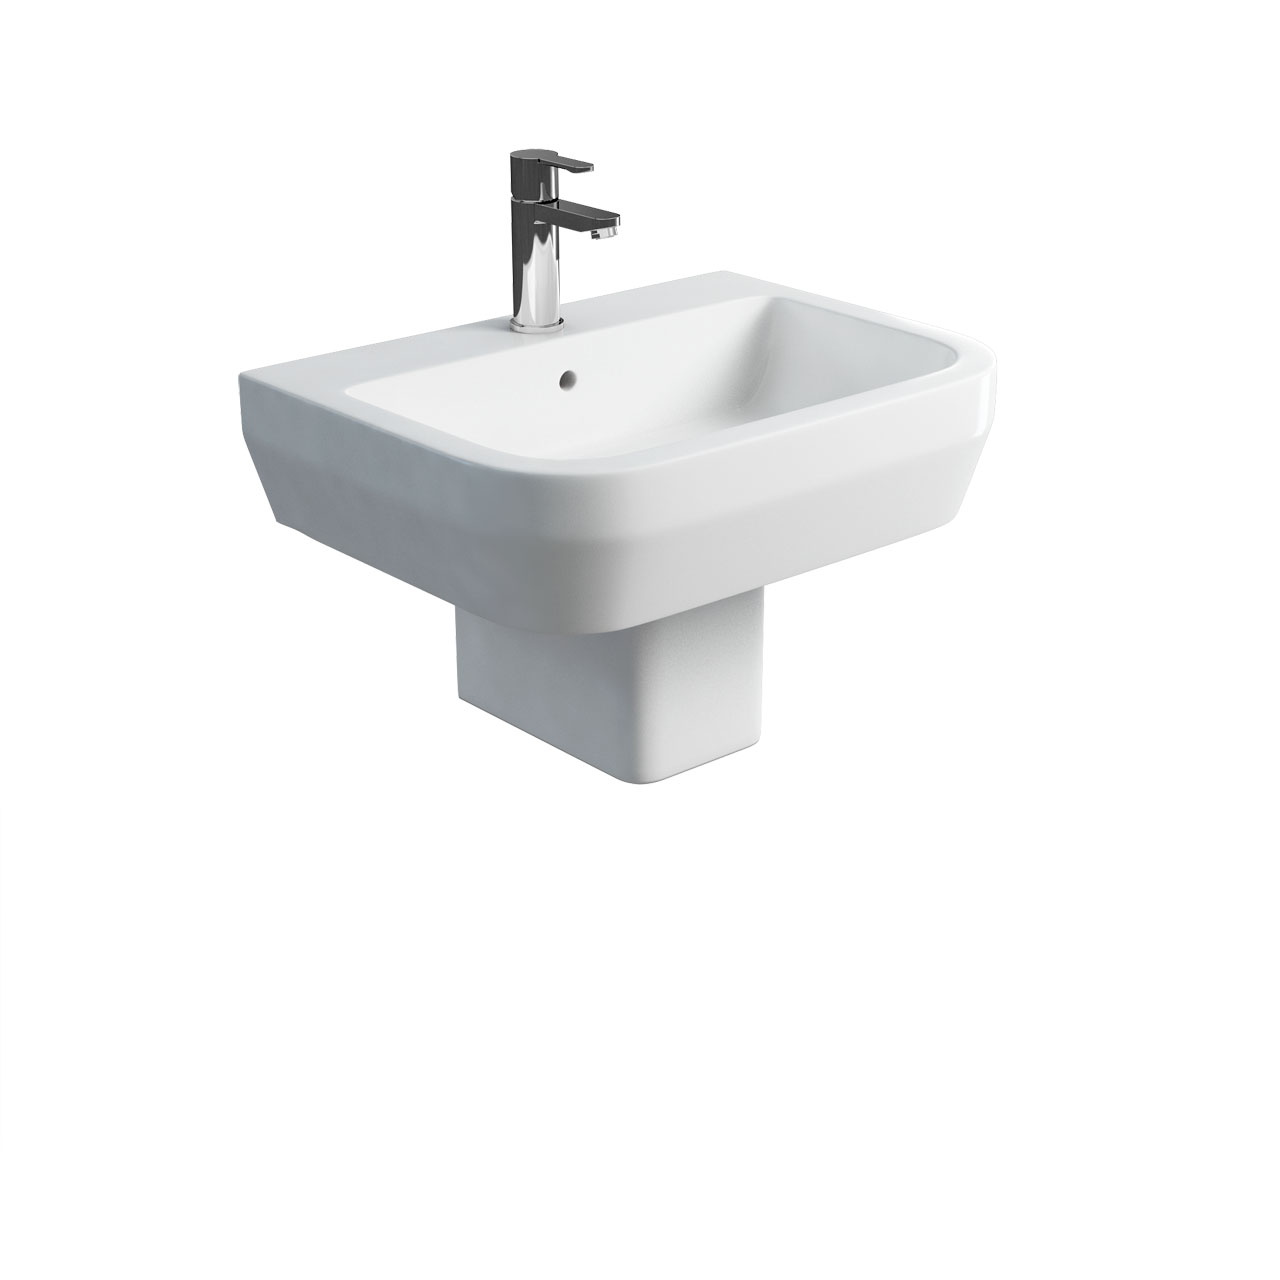 Curve S30 600 basin and square fronted semi pedestal